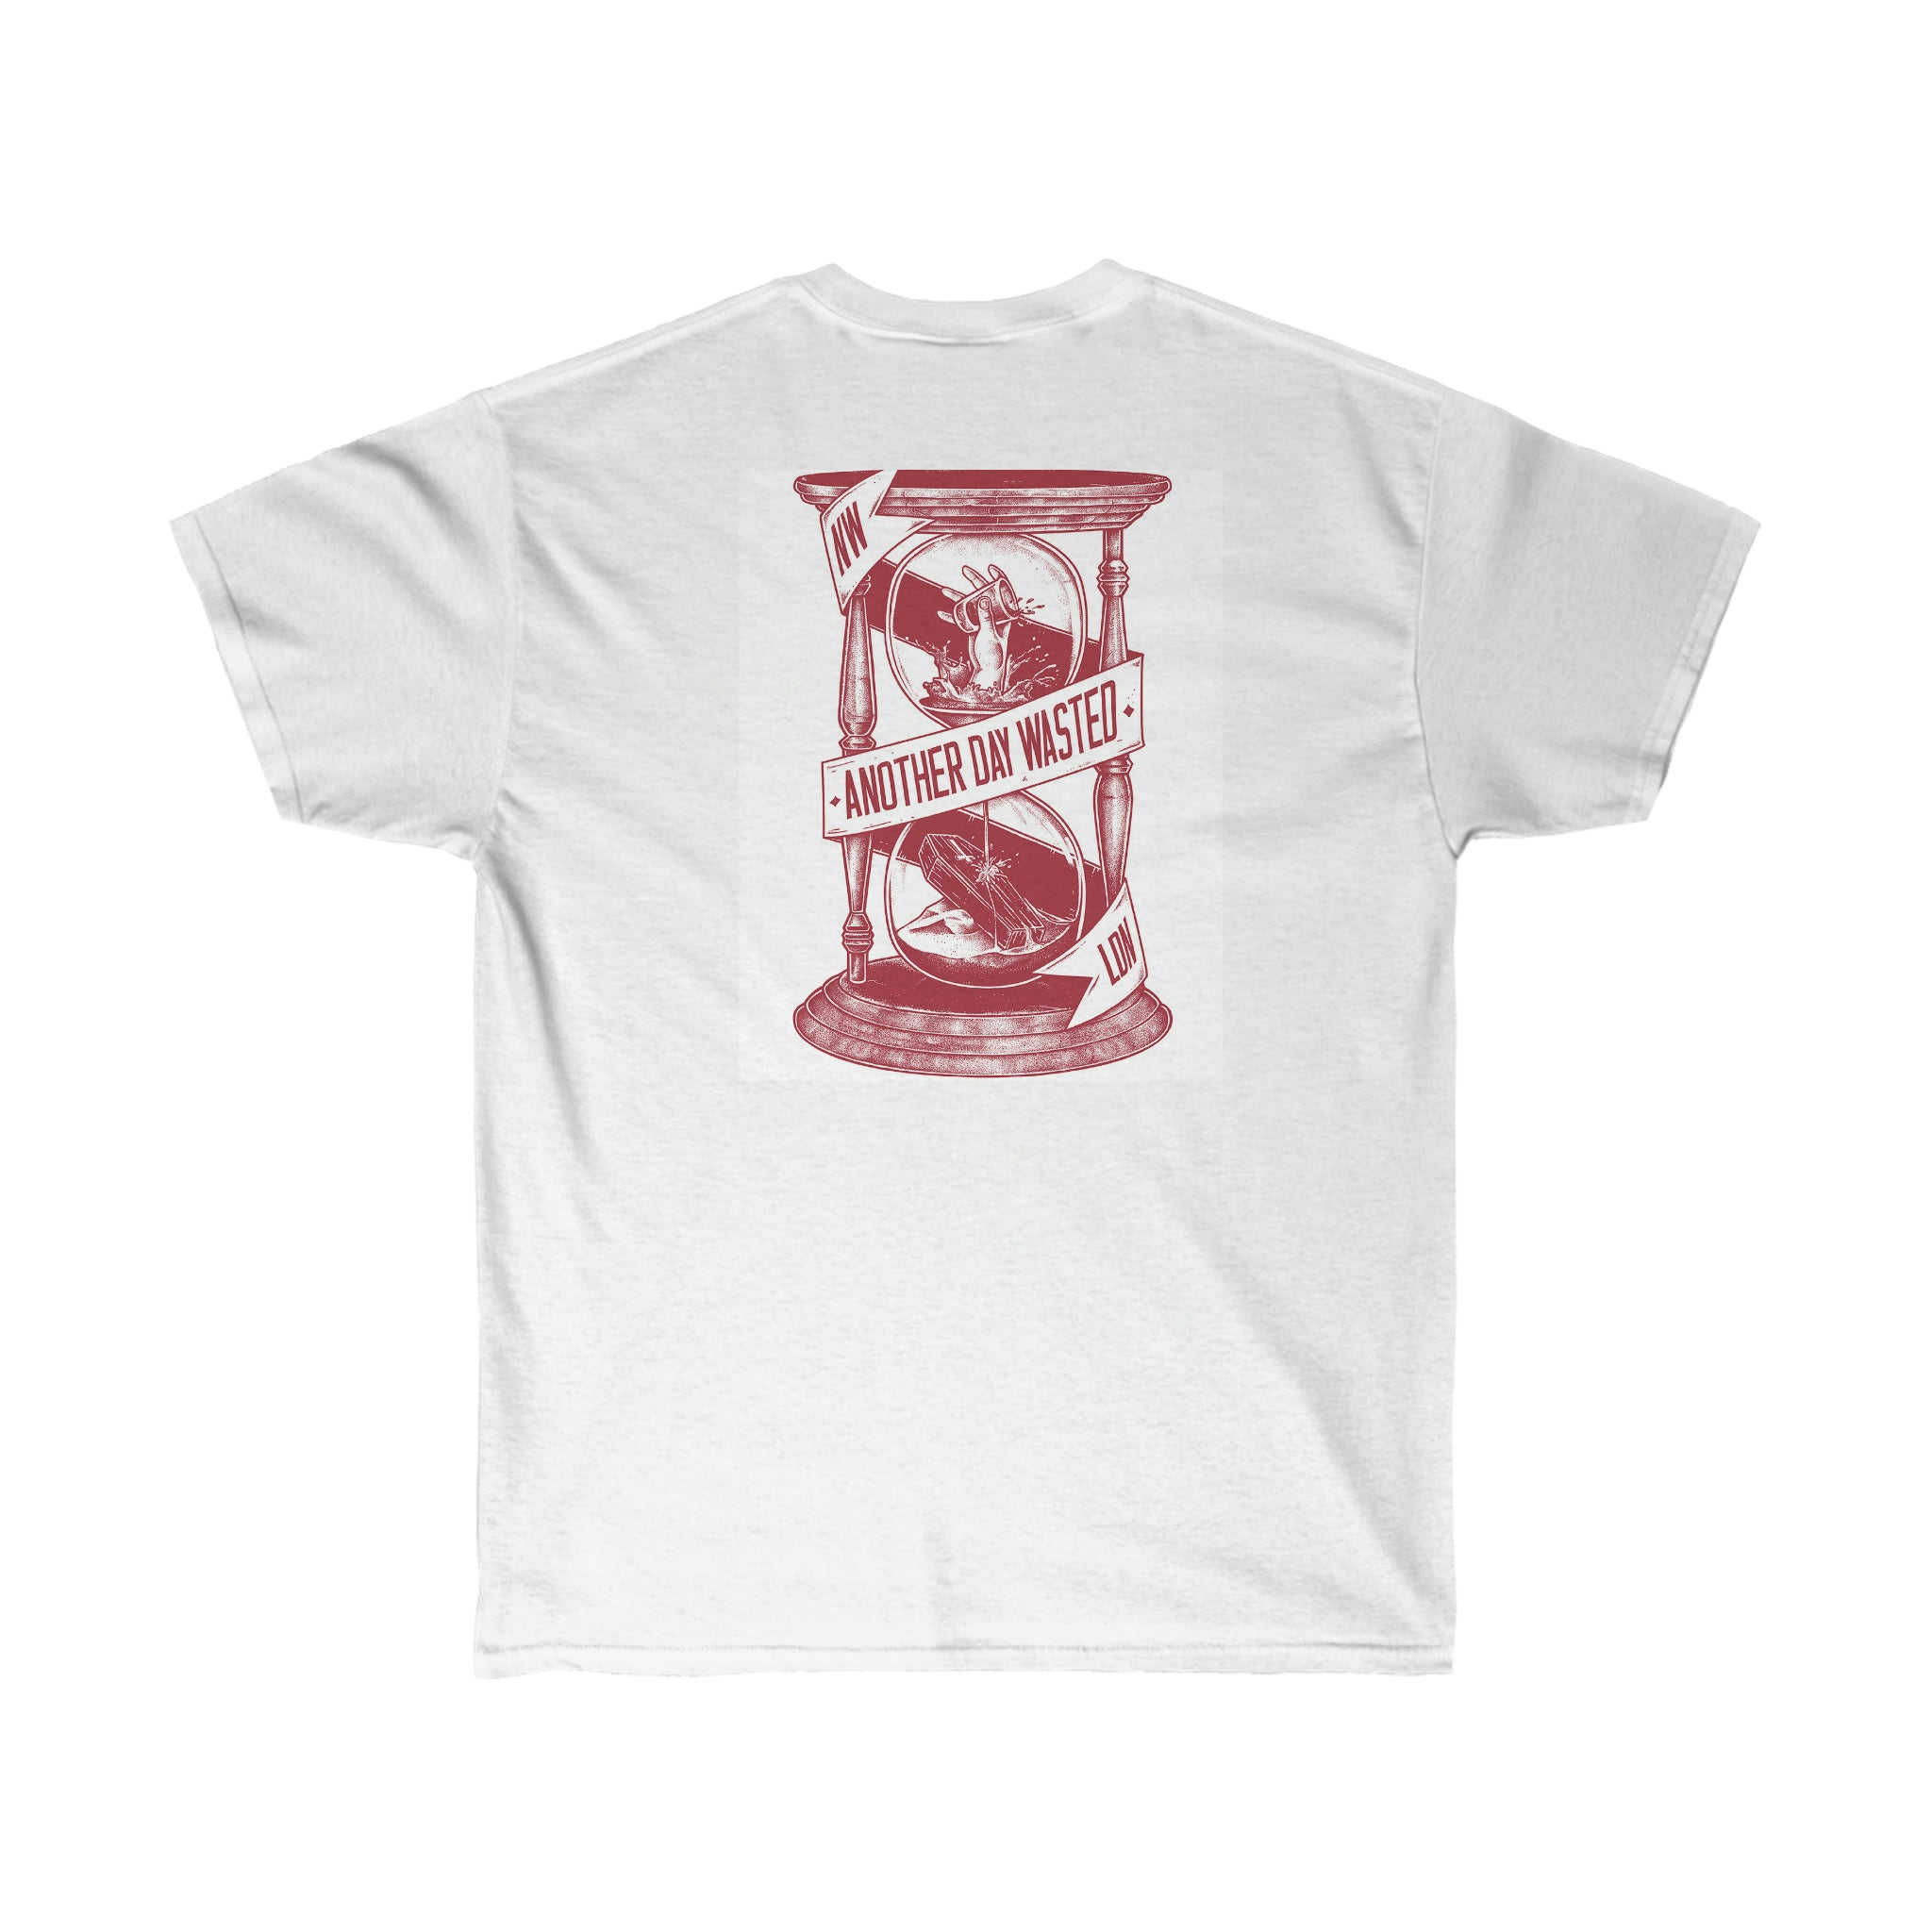 TIME WASTED TEE